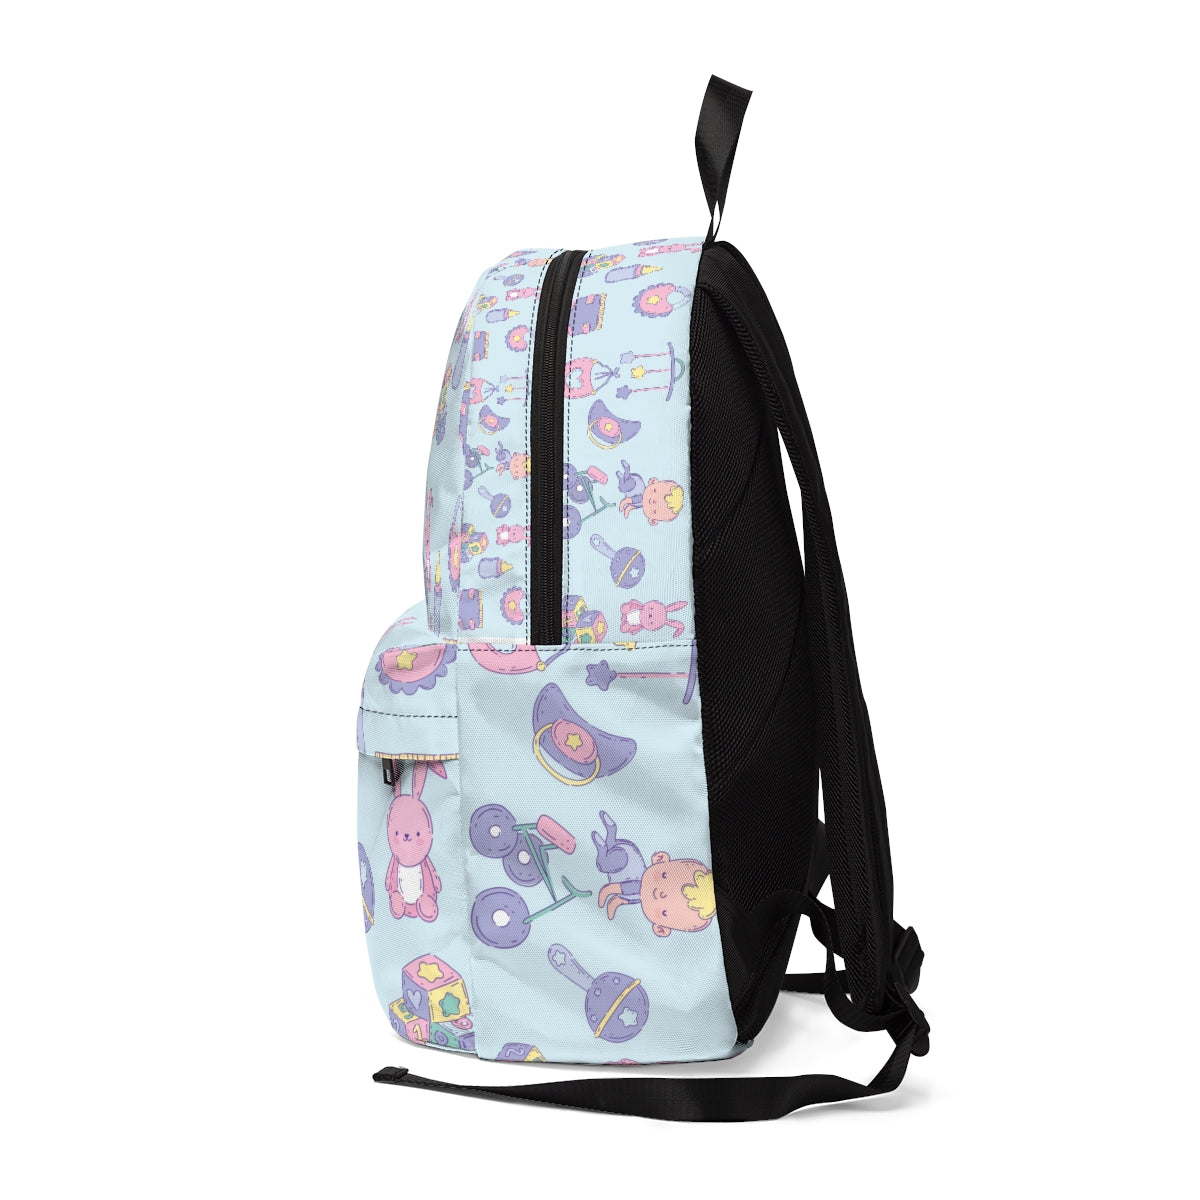 BACKPACK FOR KIDS, CUTE NEW BORN BAG, BOYS BACKPACK, UNISEX CLASSIC BACKPACK, BACK TO SCHOOL